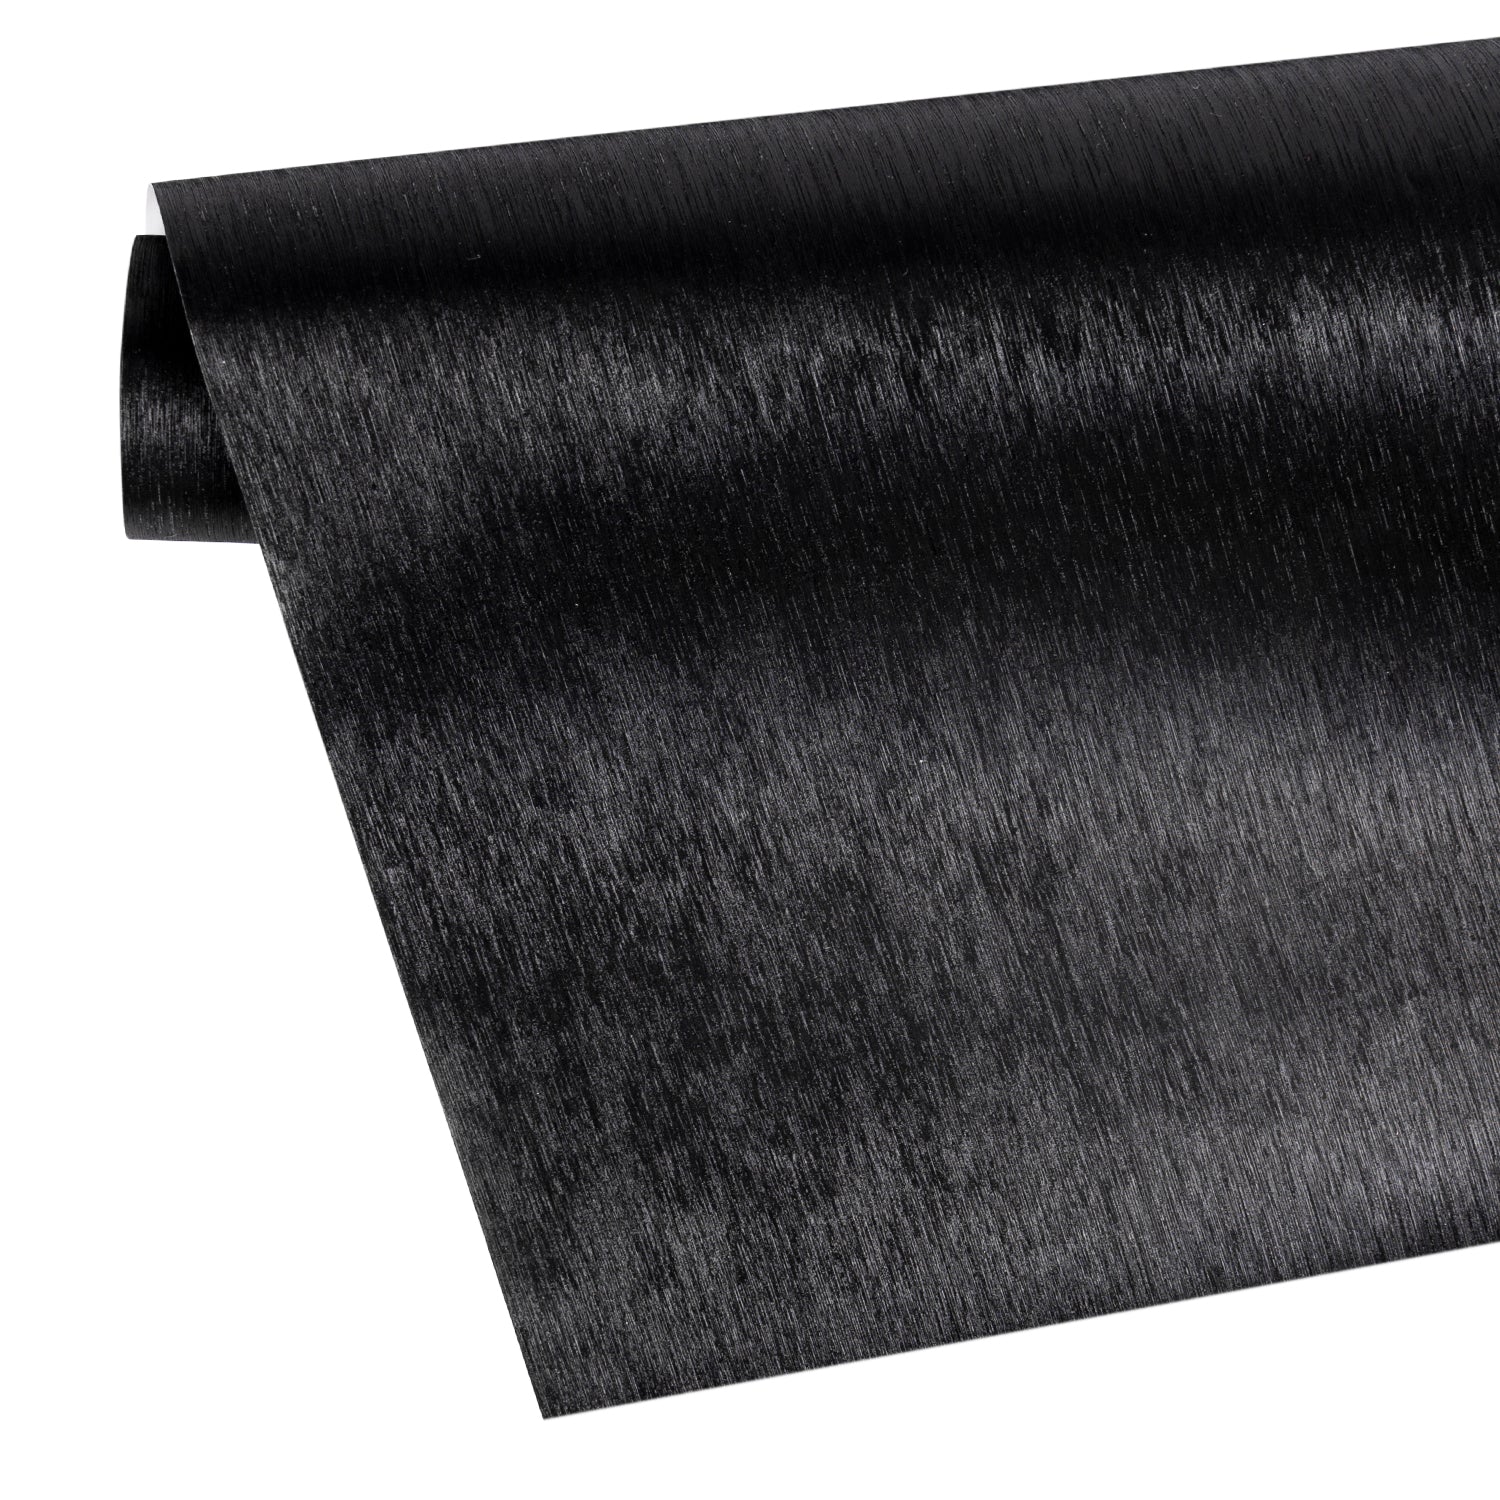 Brushed Aluminum Texture Metallic Wrapping Paper Roll Black Ream Wholesale Wraphaholic